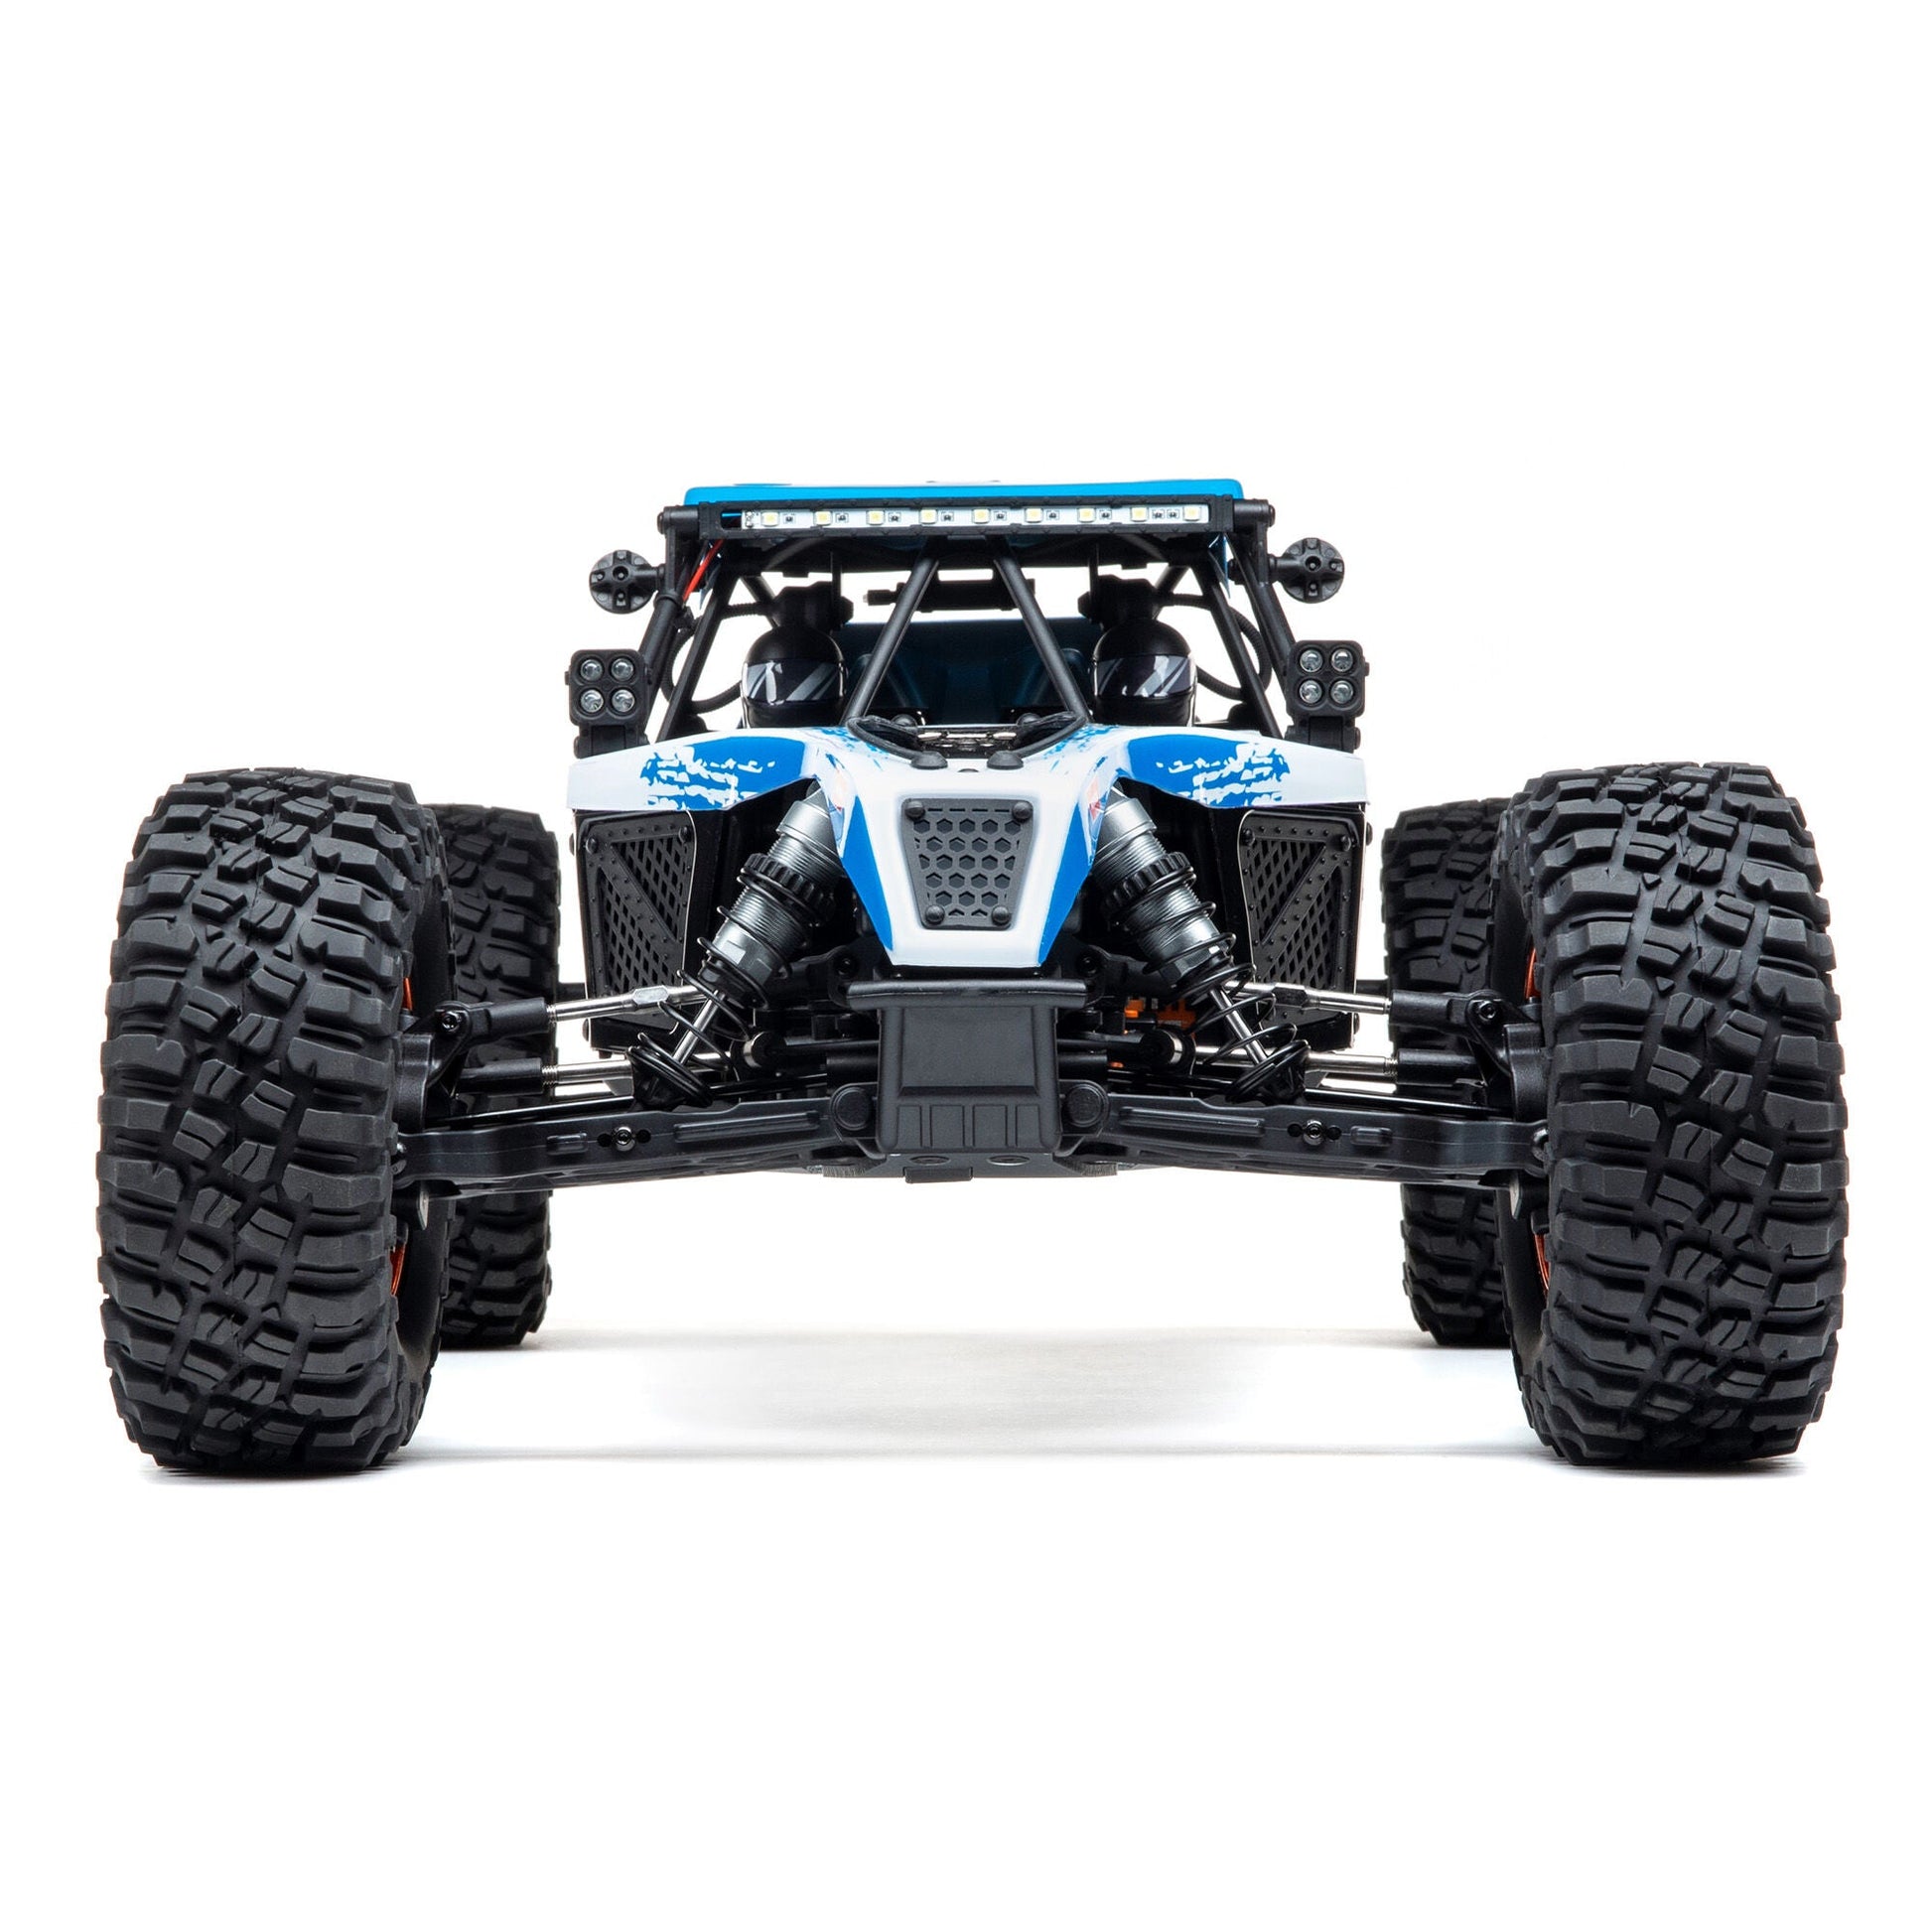 1/10 Lasernut U4 4WD Brushless RTR with Smart and AVC, Blue - Dirt Cheap RC SAVING YOU MONEY, ONE PART AT A TIME